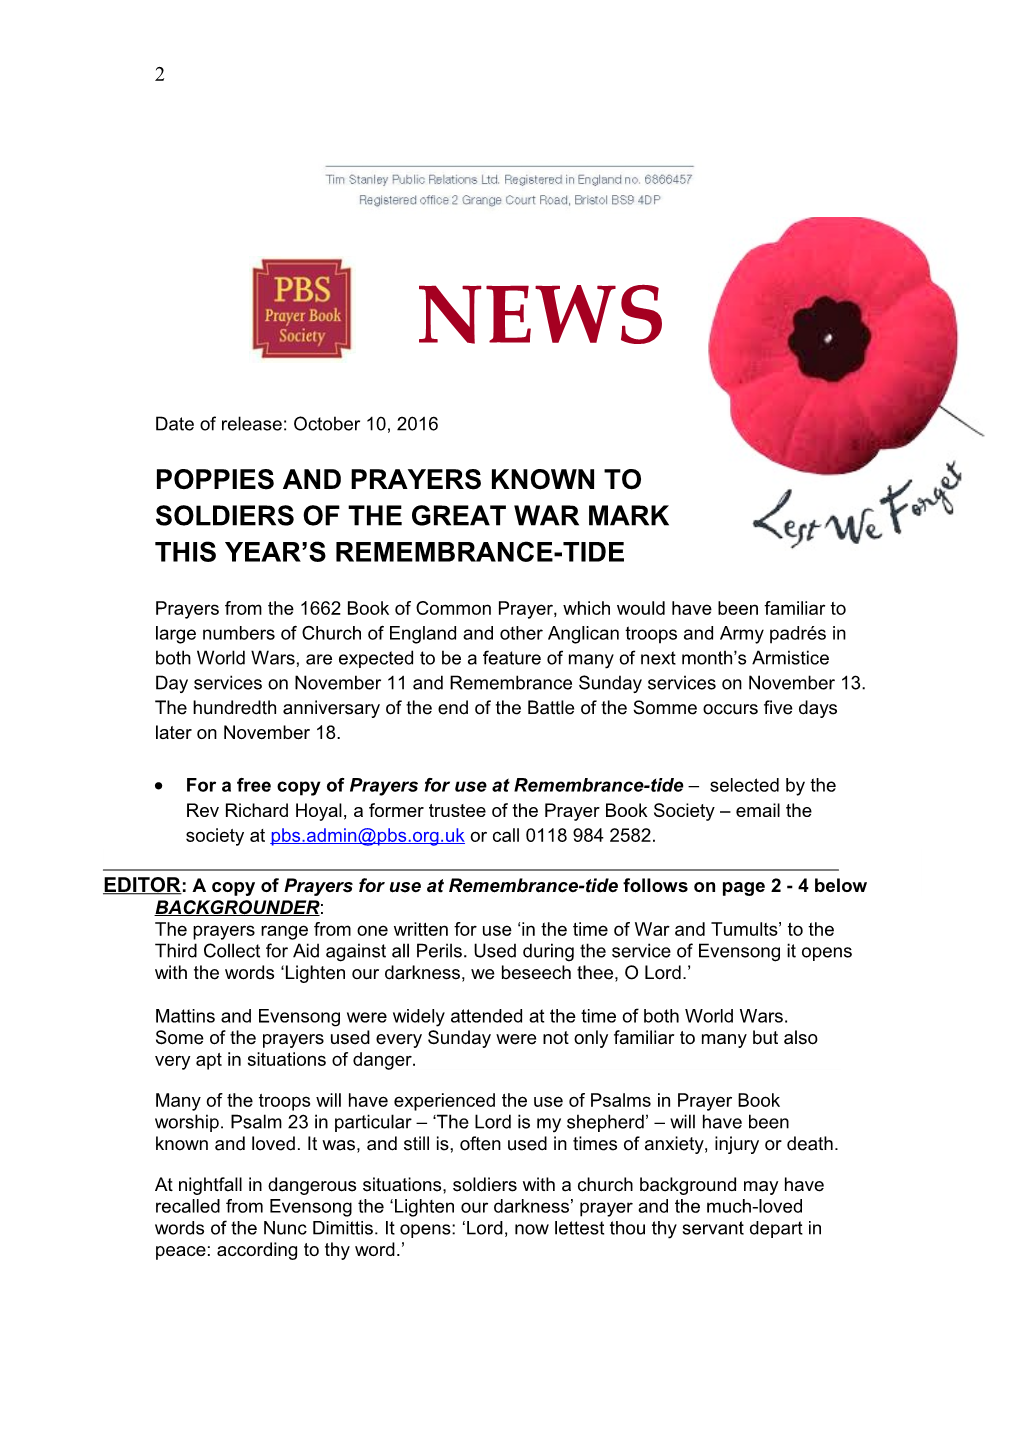 Poppies and Prayers Known To